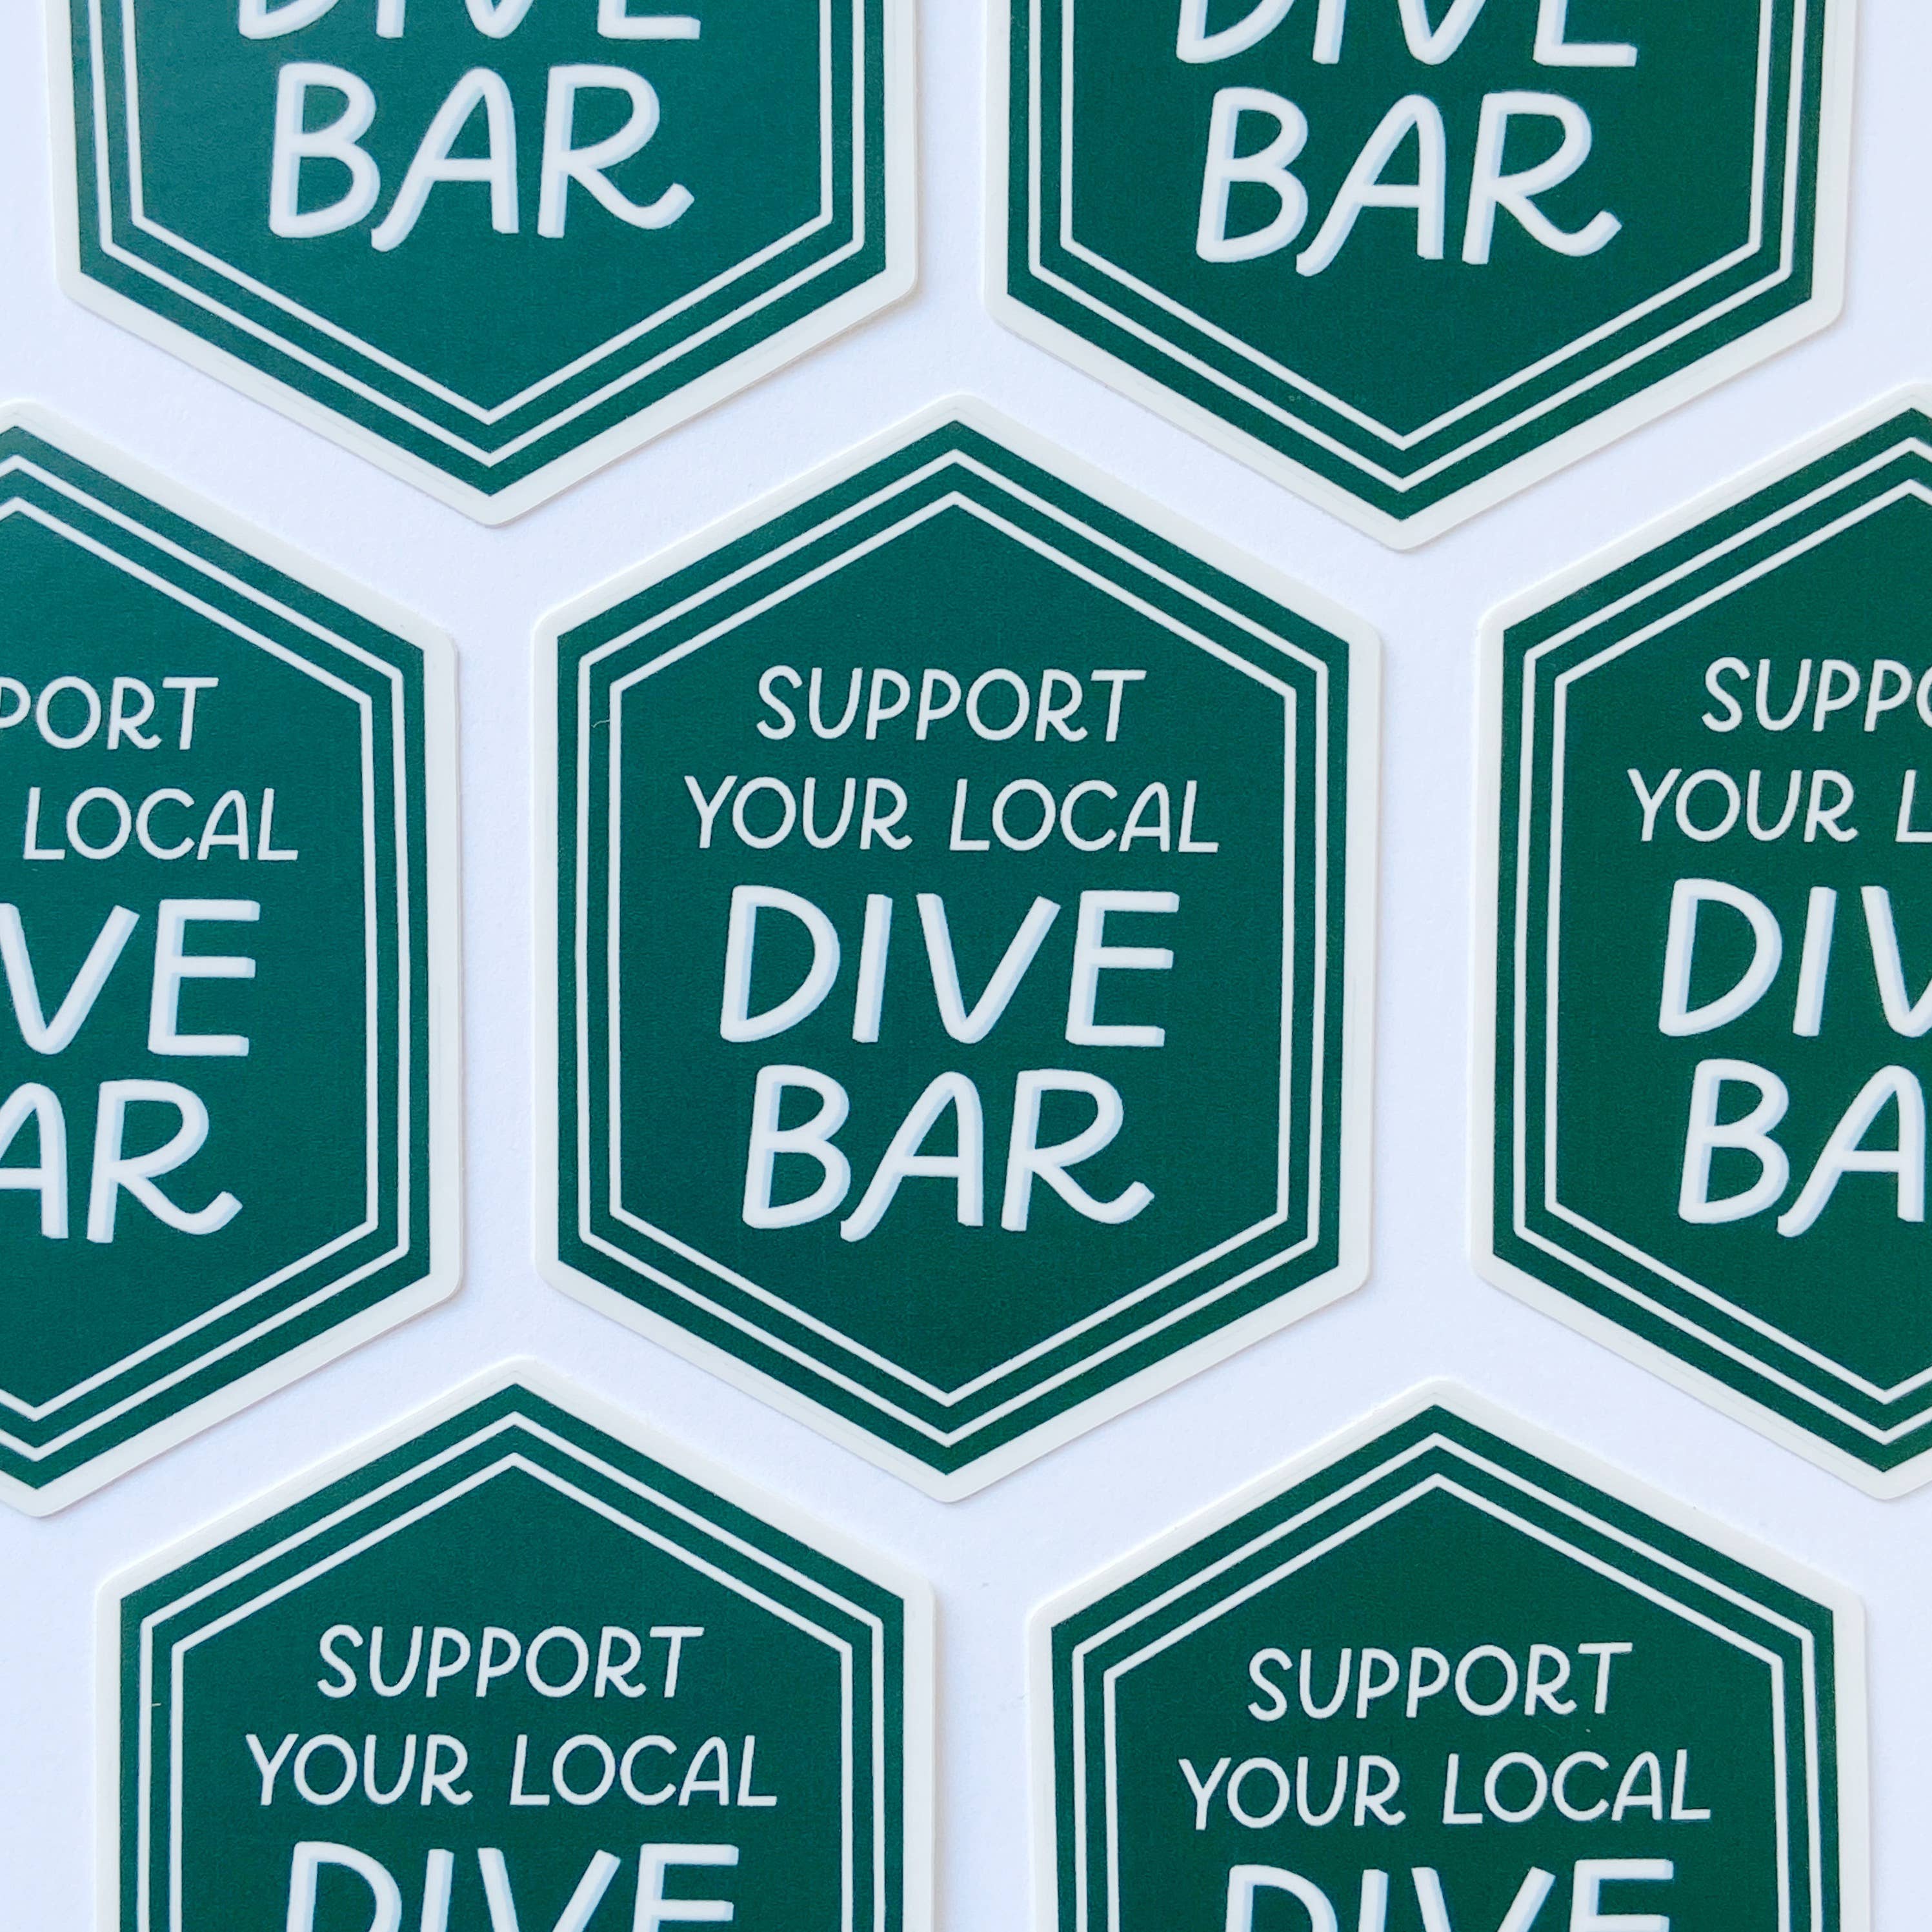 Support Your Local Dive Bar Sticker | Funny Vinyl Stickers